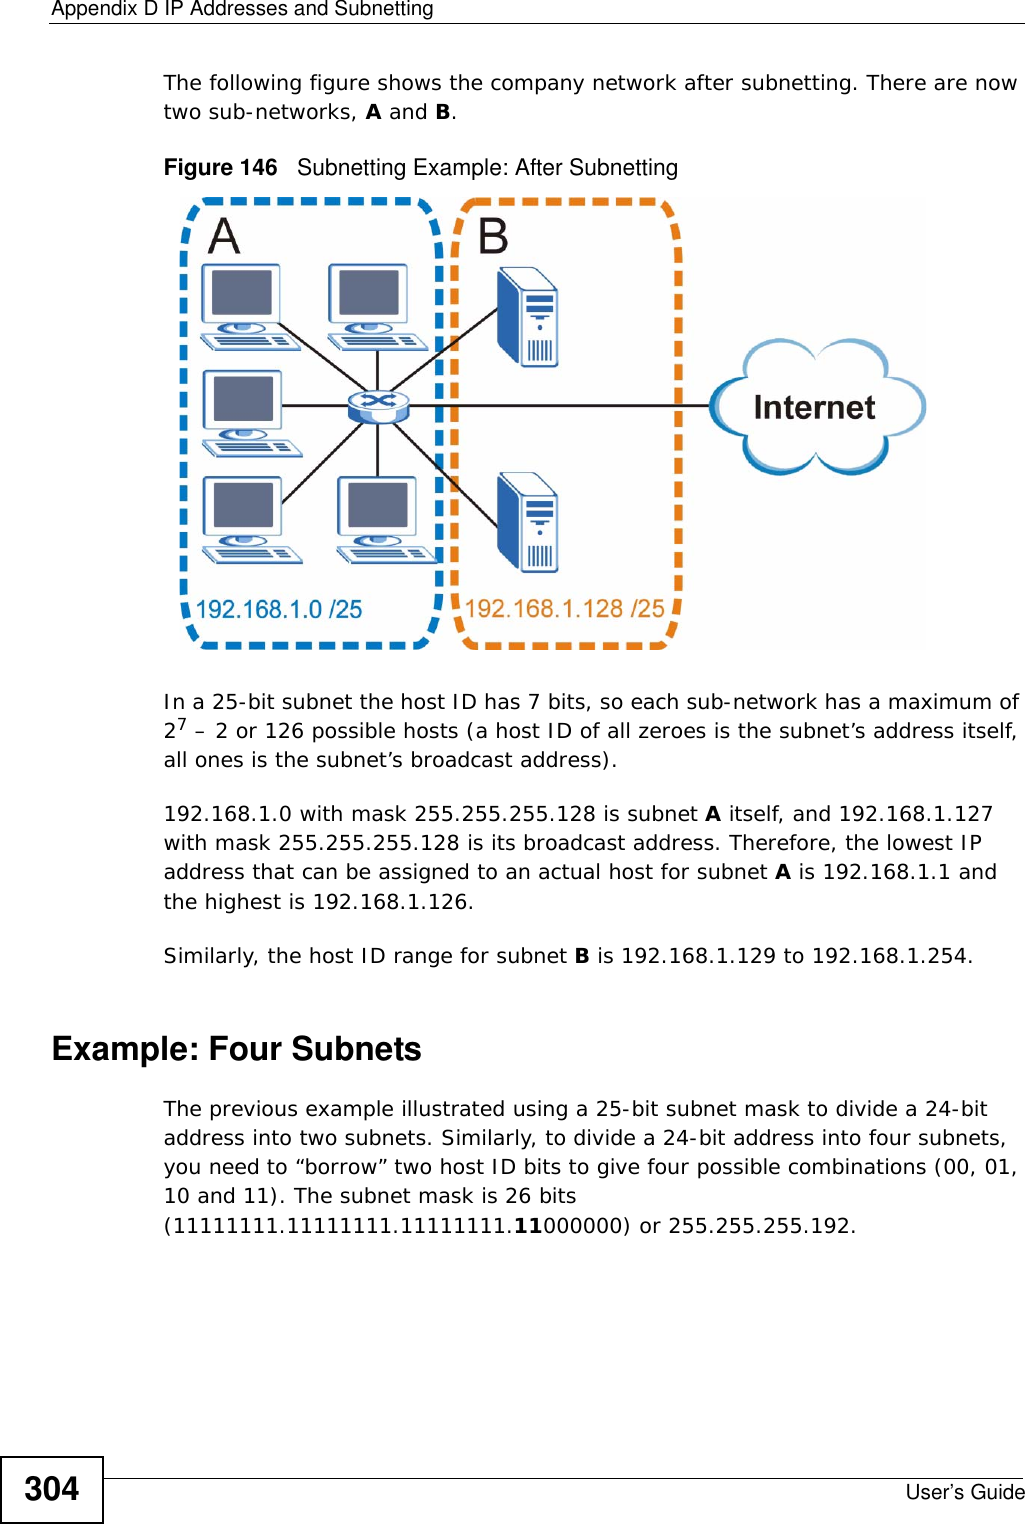 Appendix D IP Addresses and SubnettingUser’s Guide304The following figure shows the company network after subnetting. There are now two sub-networks, A and B. Figure 146   Subnetting Example: After SubnettingIn a 25-bit subnet the host ID has 7 bits, so each sub-network has a maximum of 27 – 2 or 126 possible hosts (a host ID of all zeroes is the subnet’s address itself, all ones is the subnet’s broadcast address).192.168.1.0 with mask 255.255.255.128 is subnet A itself, and 192.168.1.127 with mask 255.255.255.128 is its broadcast address. Therefore, the lowest IP address that can be assigned to an actual host for subnet A is 192.168.1.1 and the highest is 192.168.1.126. Similarly, the host ID range for subnet B is 192.168.1.129 to 192.168.1.254.Example: Four Subnets The previous example illustrated using a 25-bit subnet mask to divide a 24-bit address into two subnets. Similarly, to divide a 24-bit address into four subnets, you need to “borrow” two host ID bits to give four possible combinations (00, 01, 10 and 11). The subnet mask is 26 bits (11111111.11111111.11111111.11000000) or 255.255.255.192. 